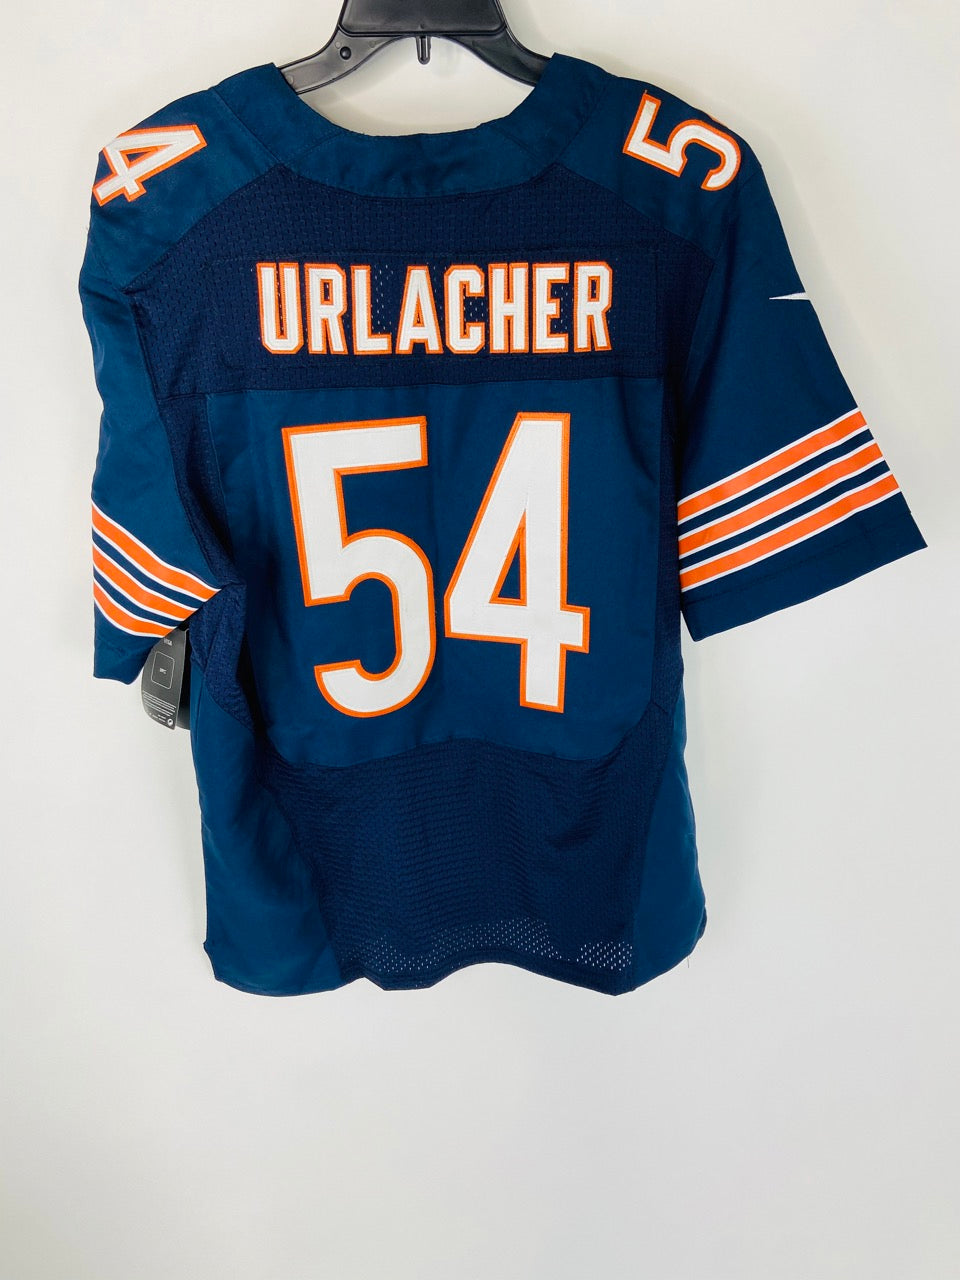 Chicago Bears Brian Urlacher Jersey- NWT - L (44) – The Adopted Closet